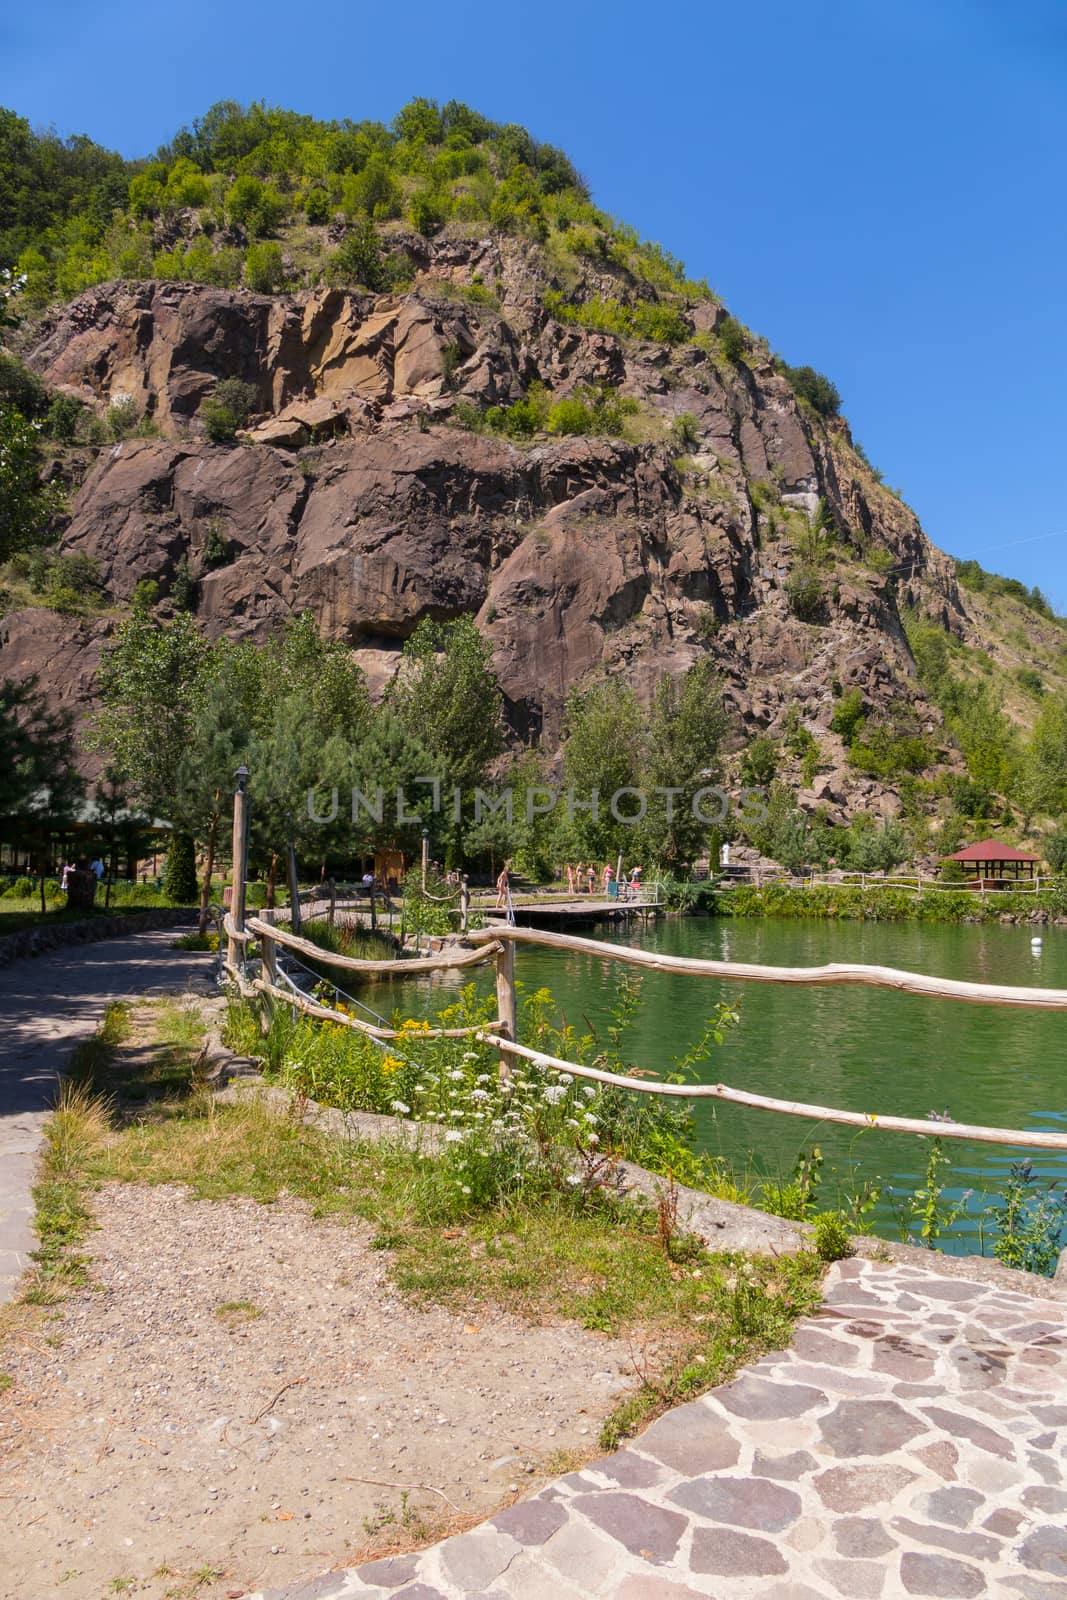 Lake with a gazebo on the shore at the foot of a tall rock on a blue clear sky background